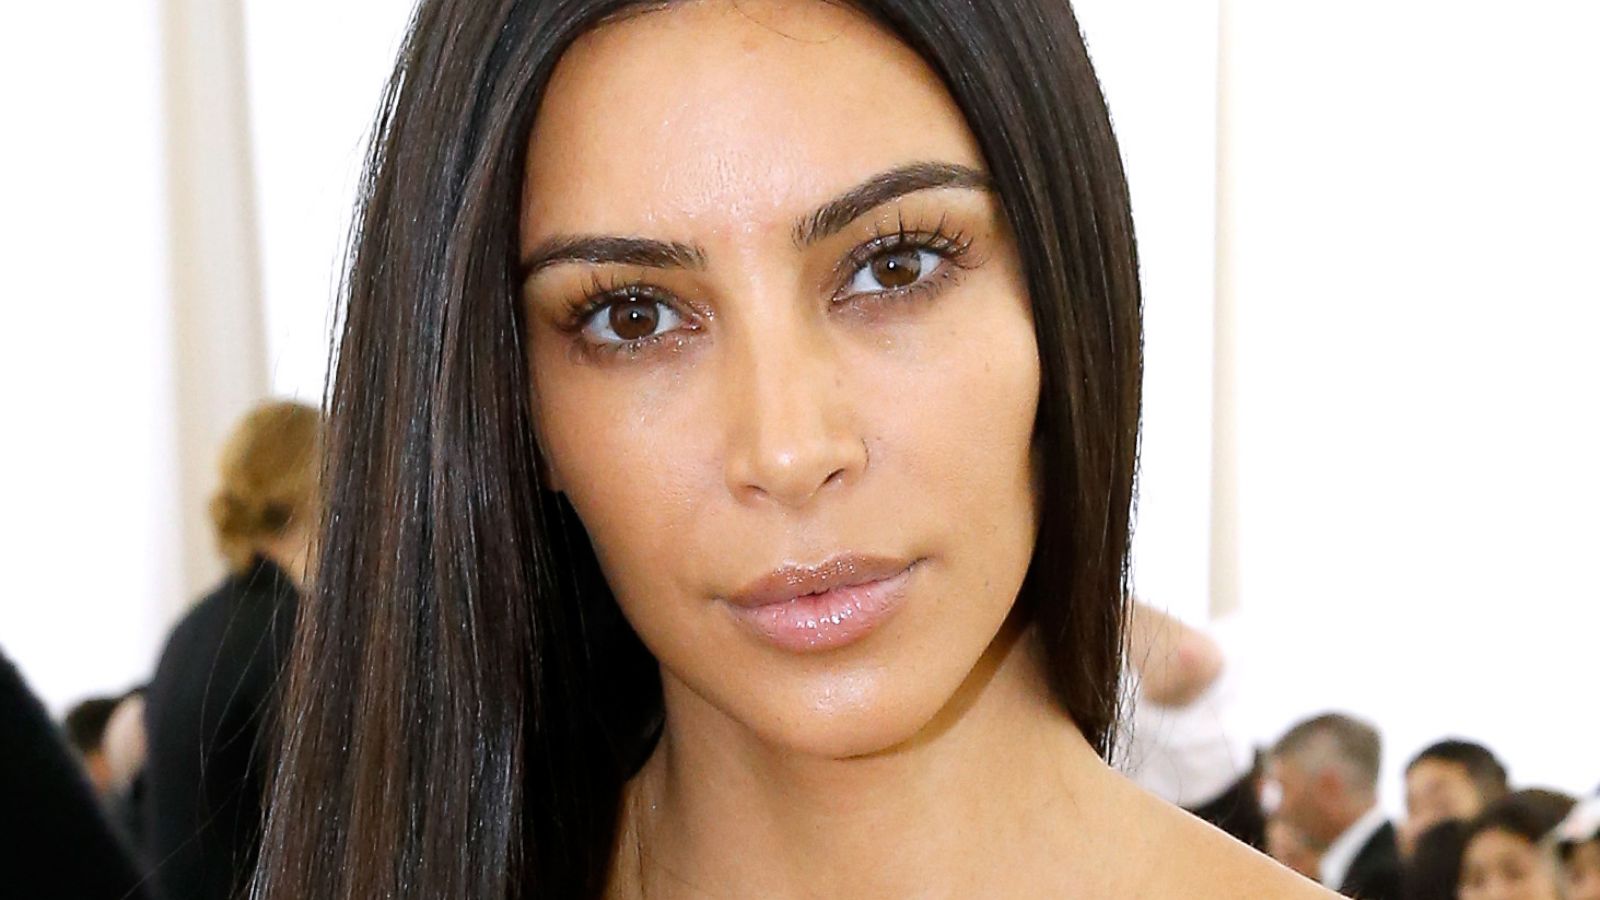 West Is Latest Celebrity to Without Makeup - ABC News